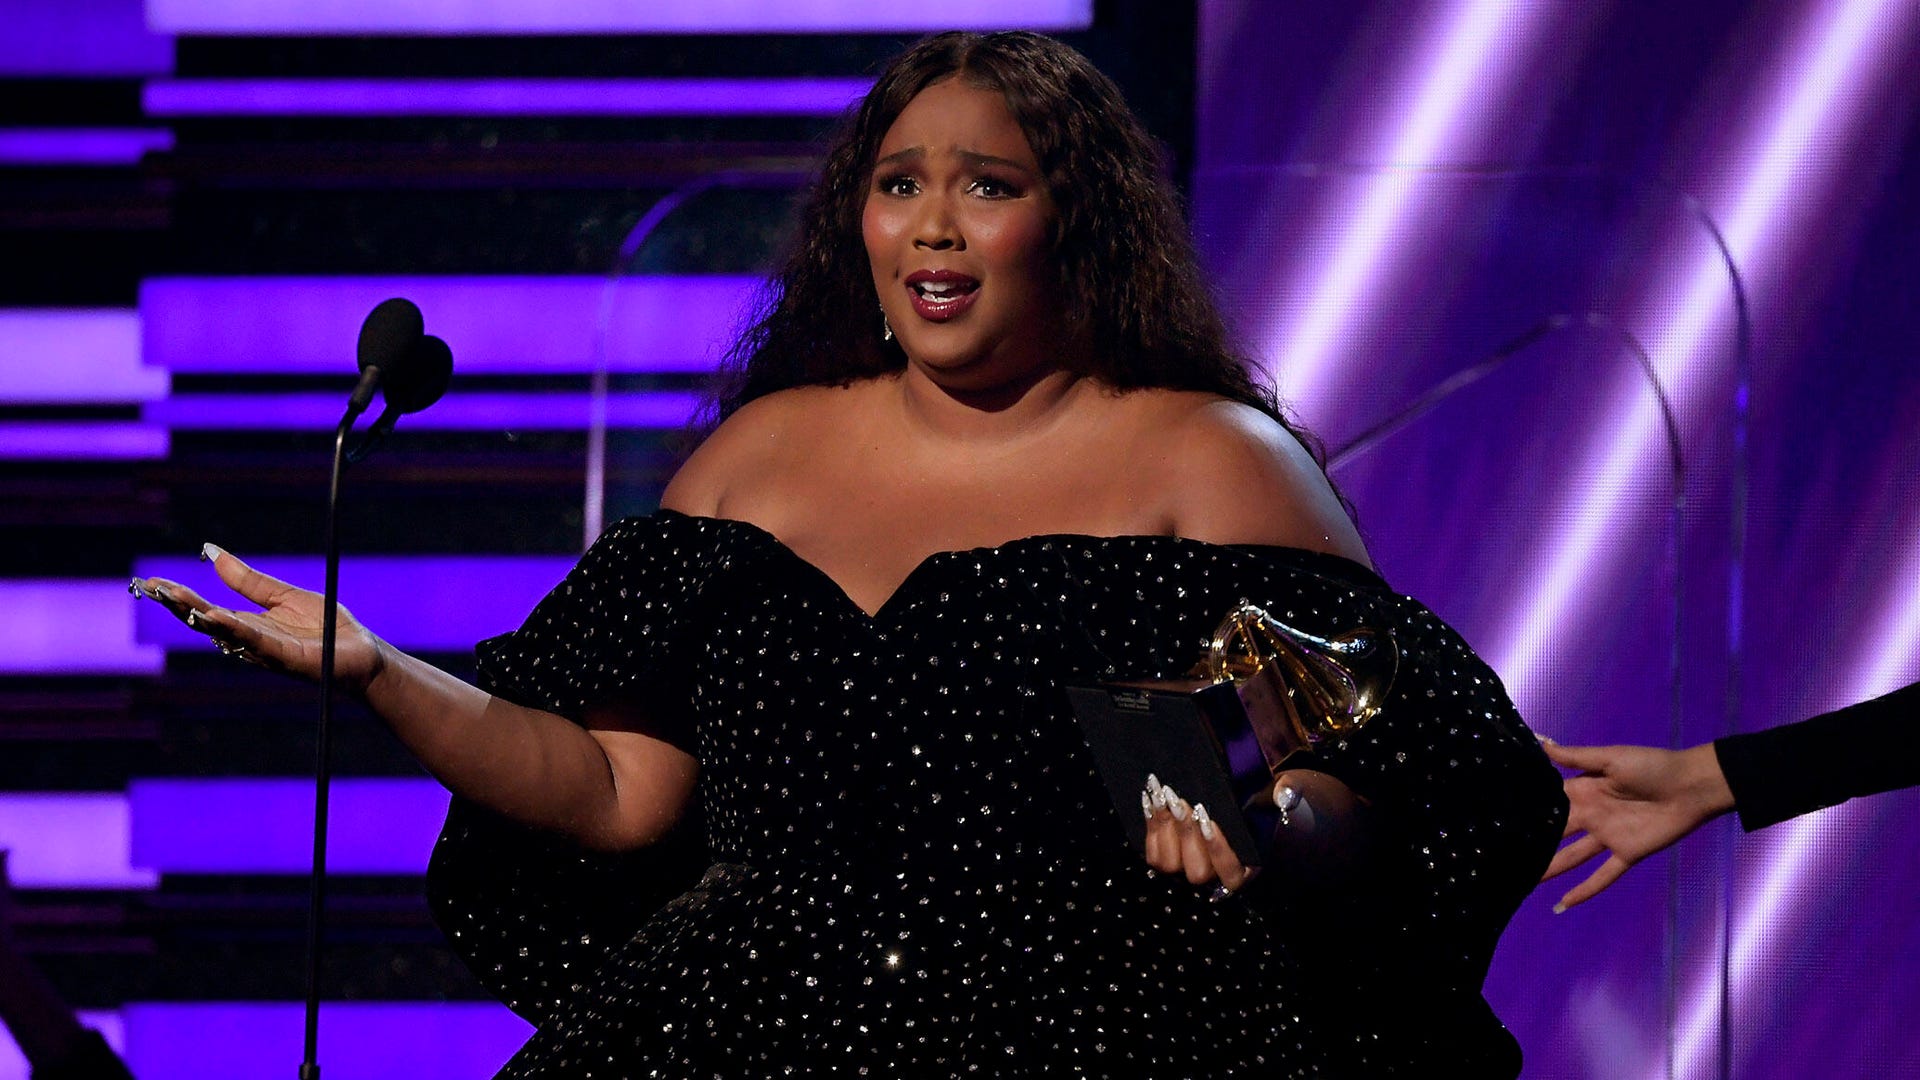 Lizzo at the 2020 Grammy Awards